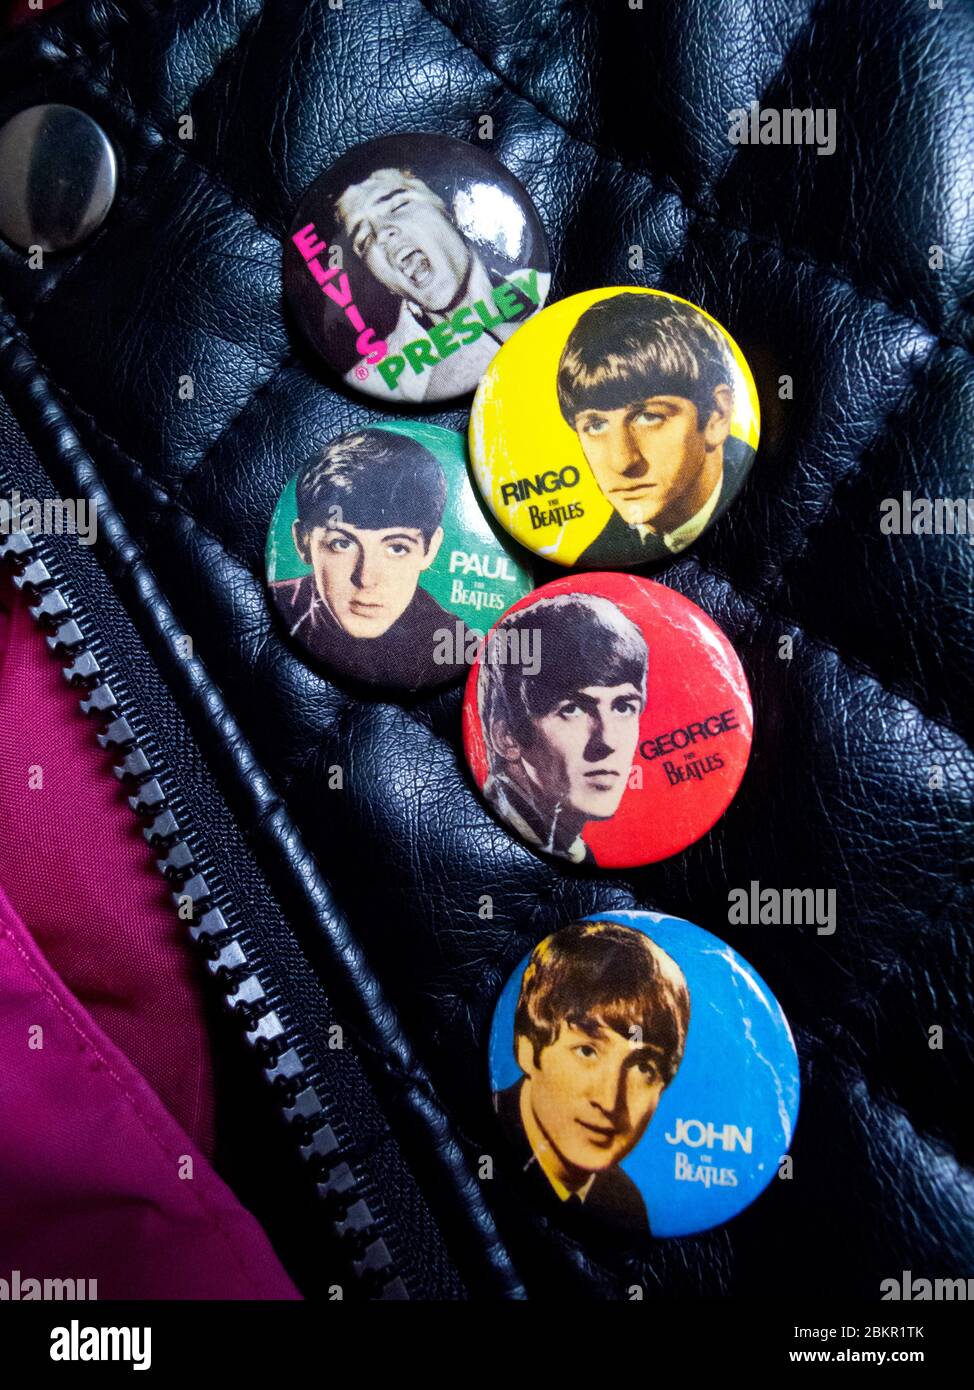 Leather jacket with badges of The Beatles John Lennon Paul McCartney George Harrison and Ringo Starr next to a badge showing Elvis Presley. Stock Photo